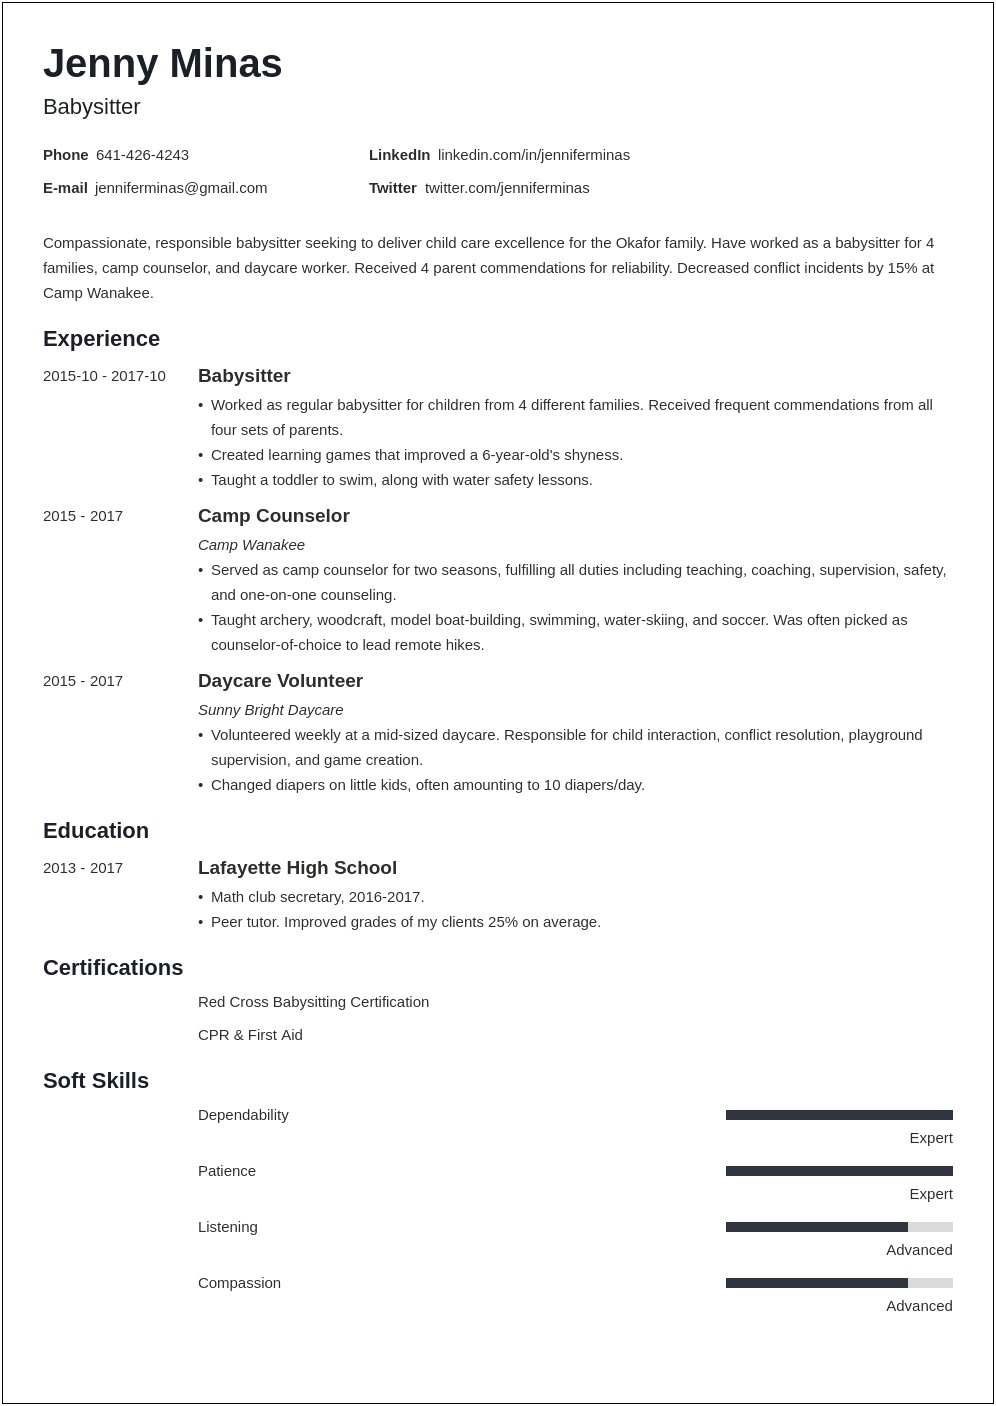 Example Of Baby Sitting Resume